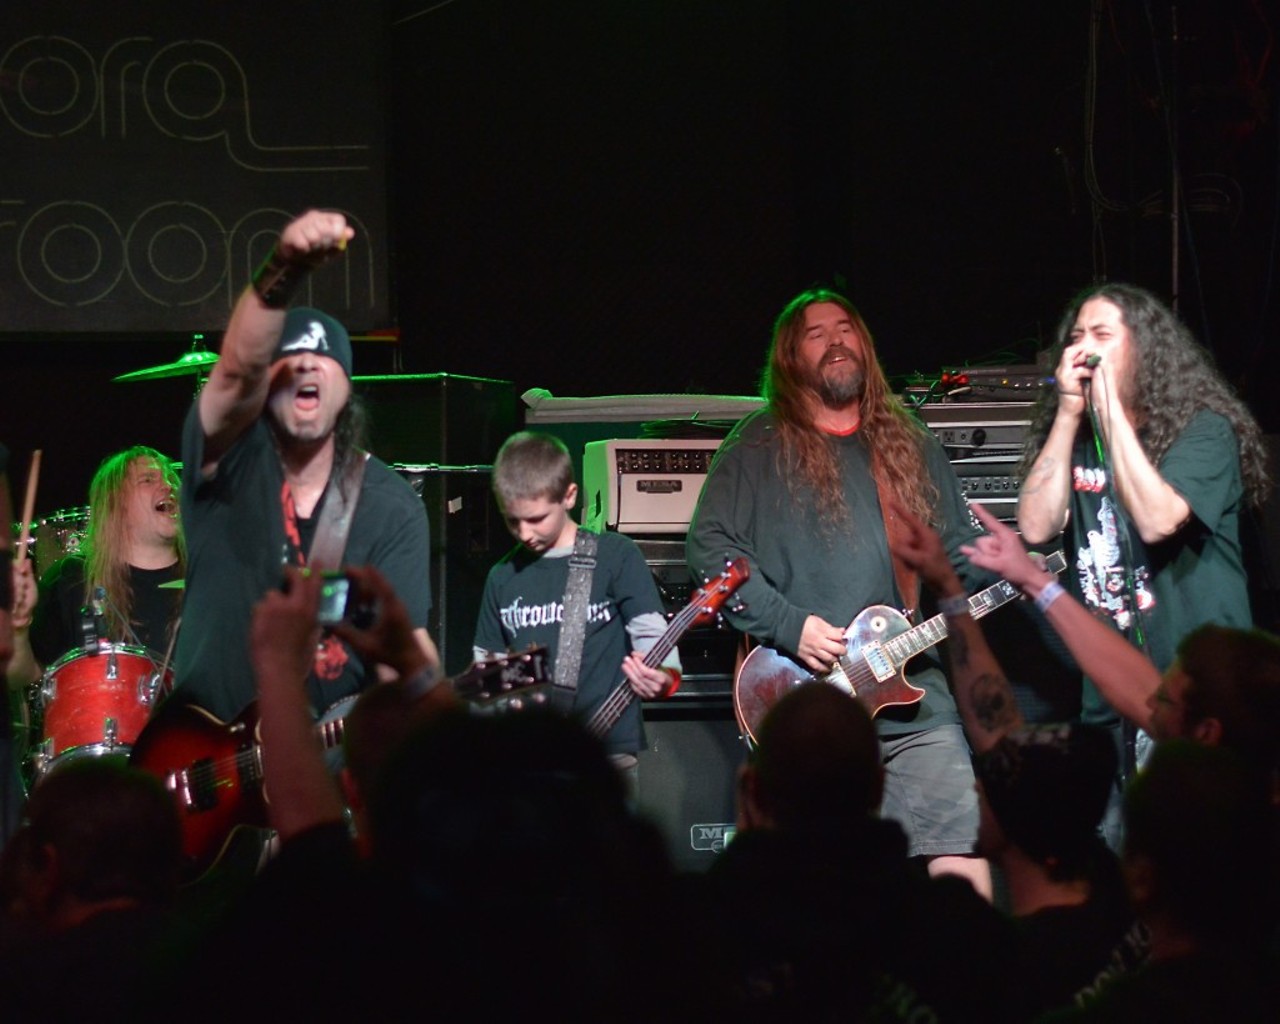 Cavalera Conspiracy, Death Angel and Corrosion of Conformity Blind Performing at the Agora